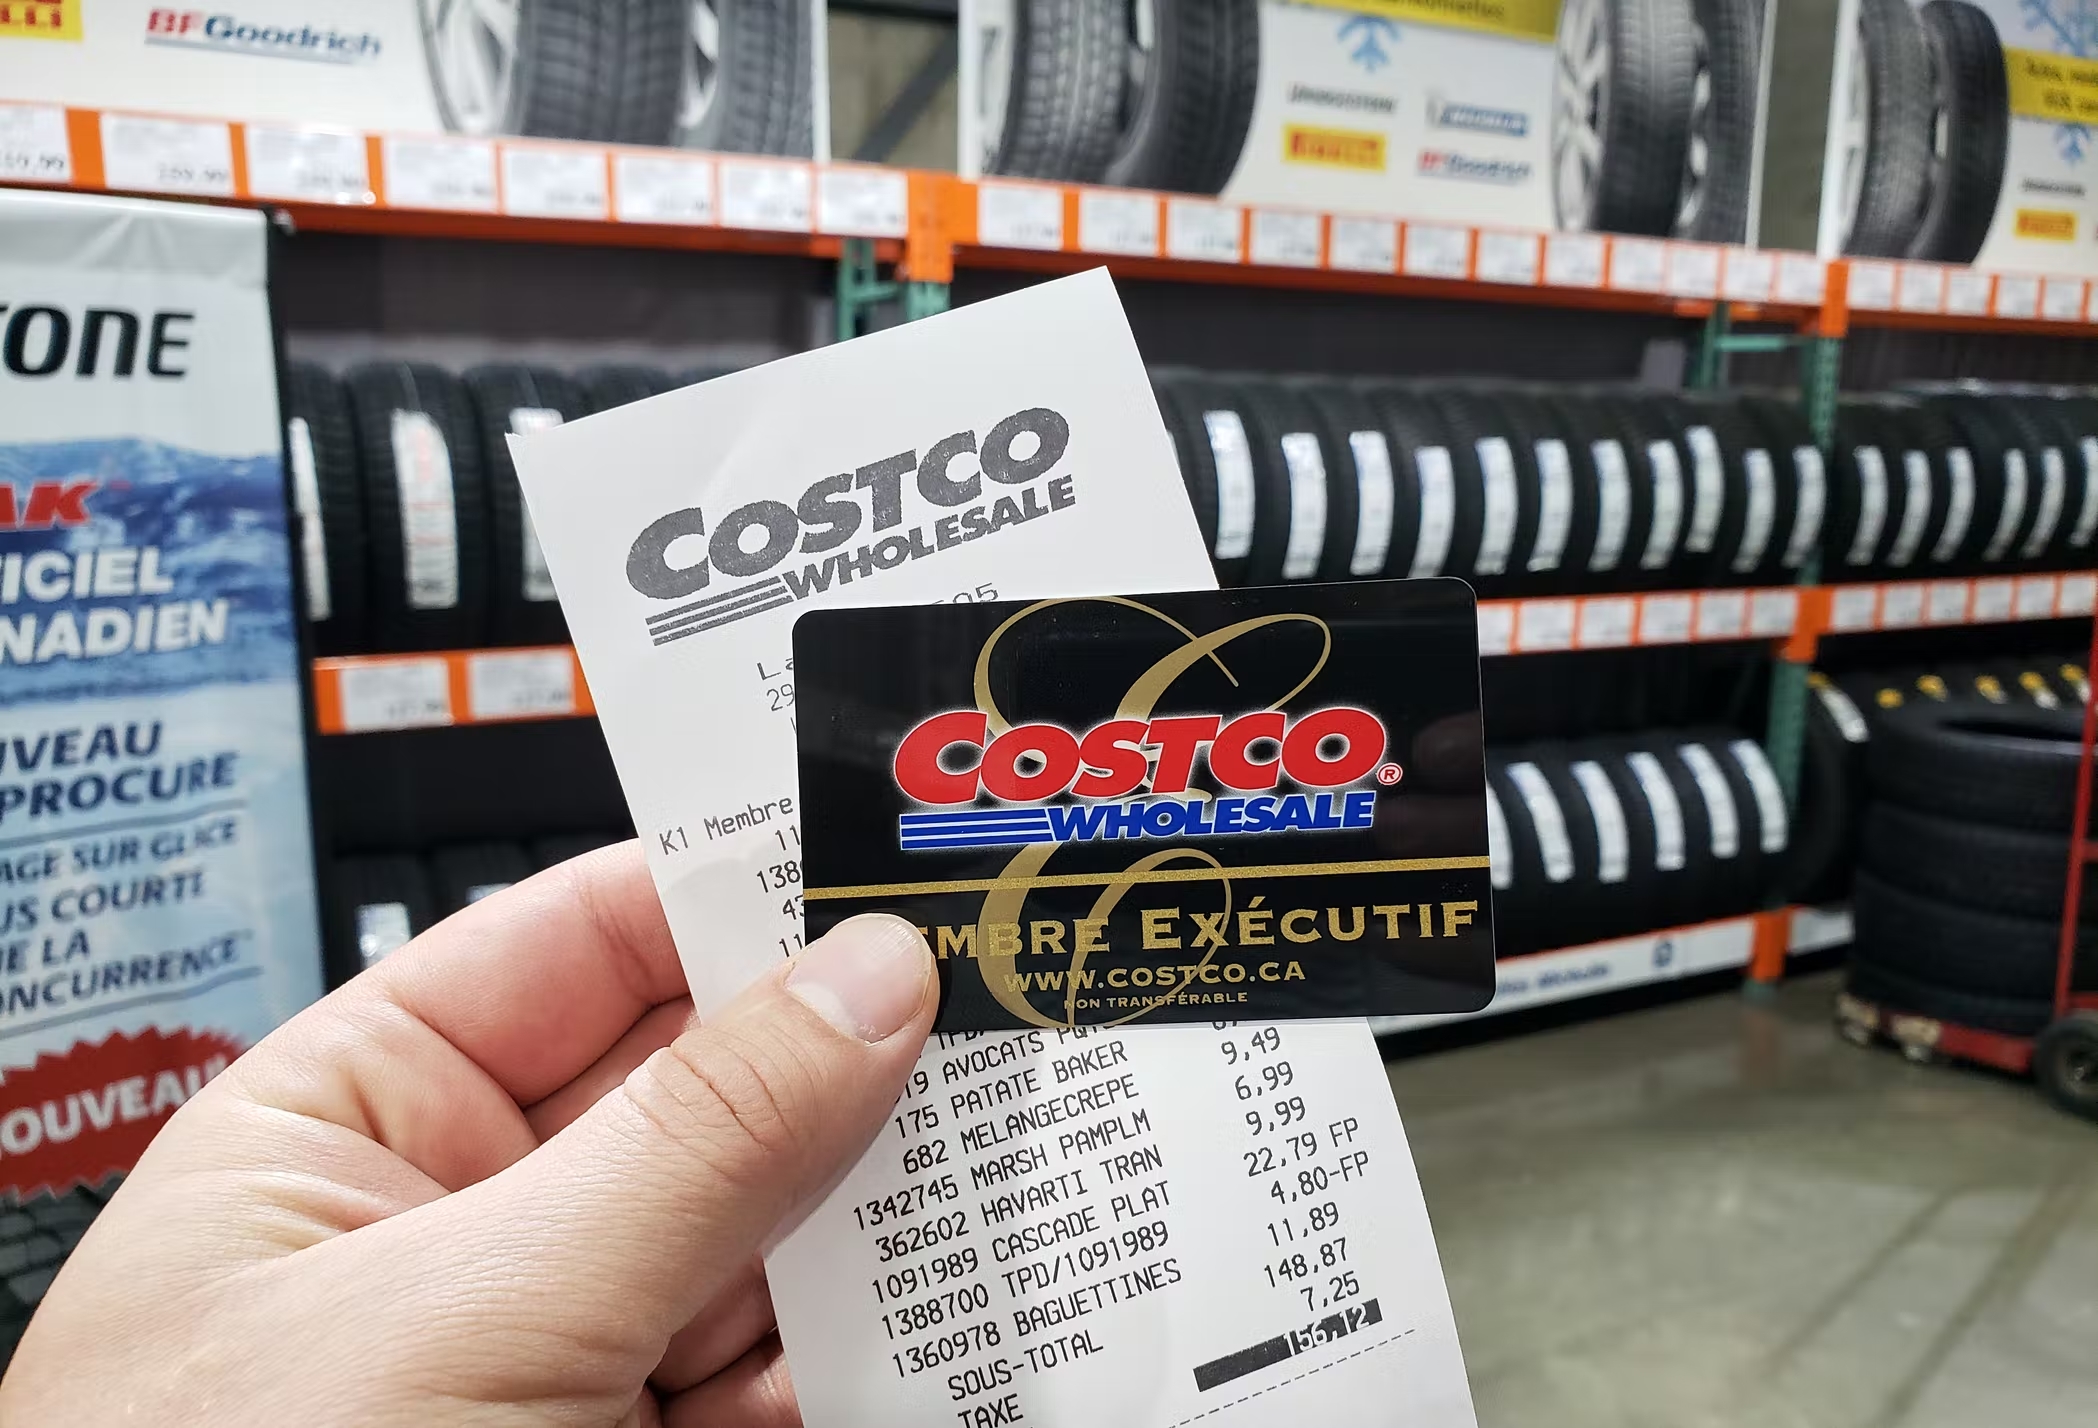 Why Buy Tires from Costco